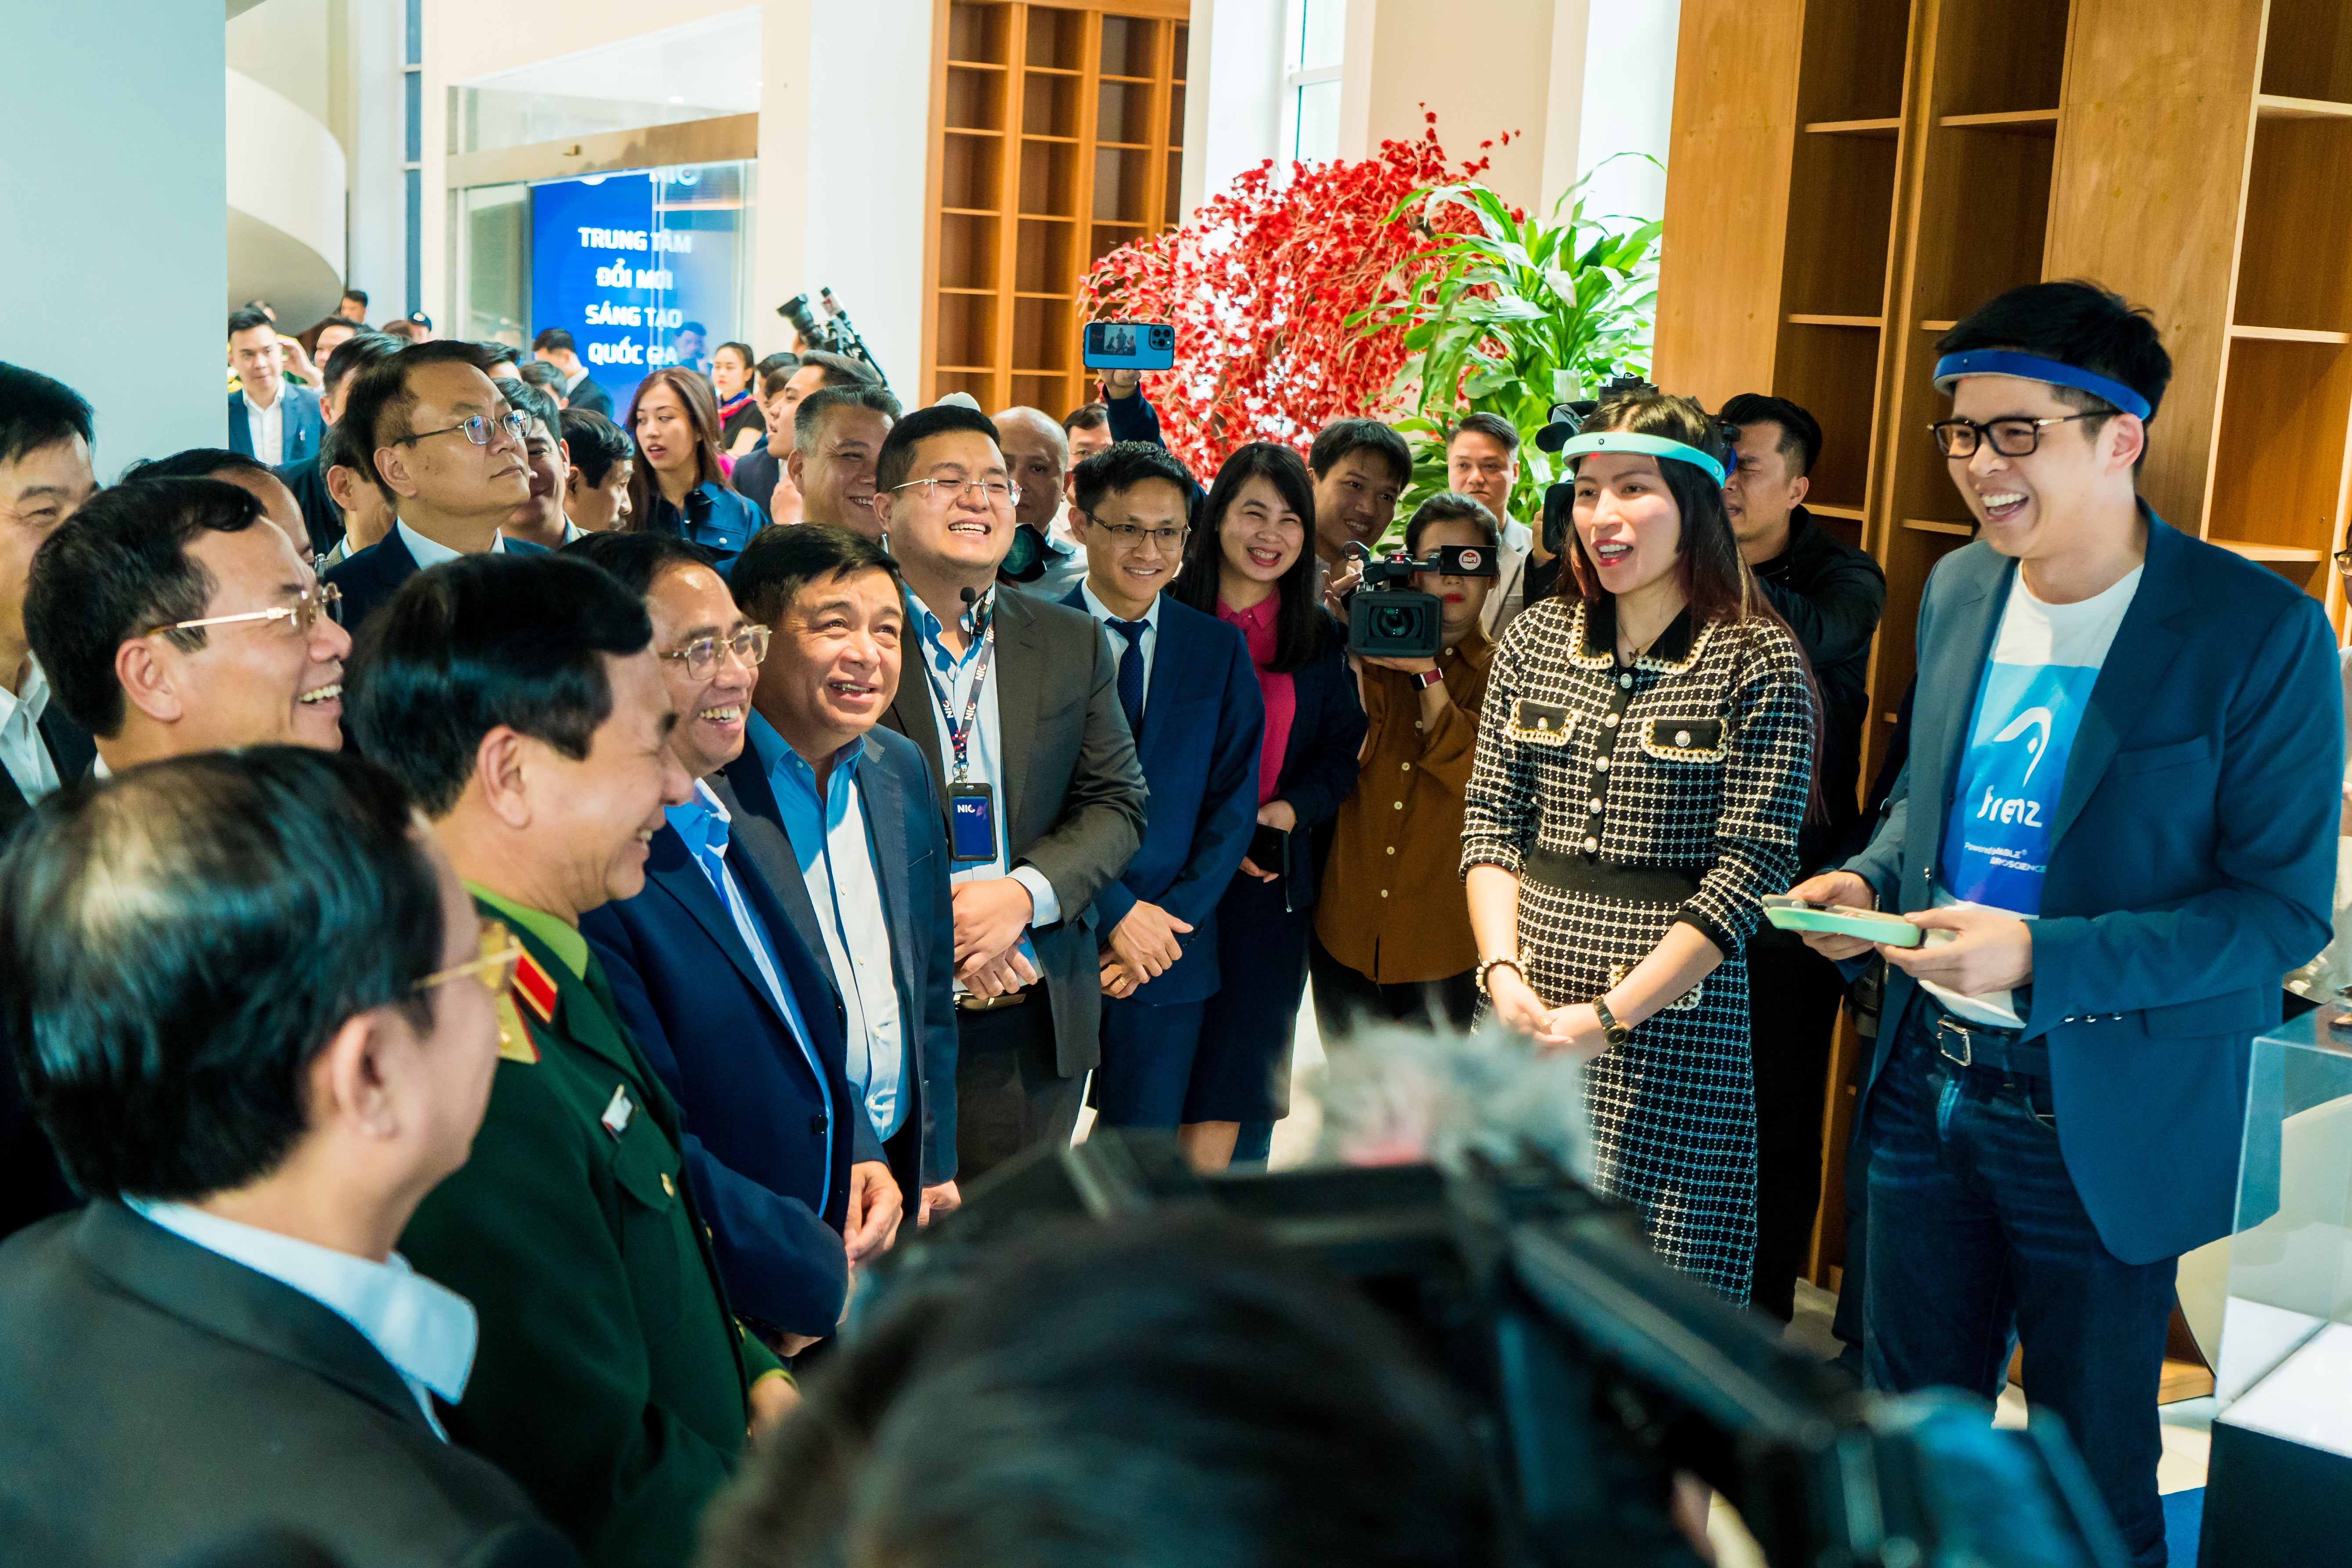 Prime Minister of Vietnam Experienced FRENZ Brainband by Earable Neuroscience during his visit to the National Innovation Center